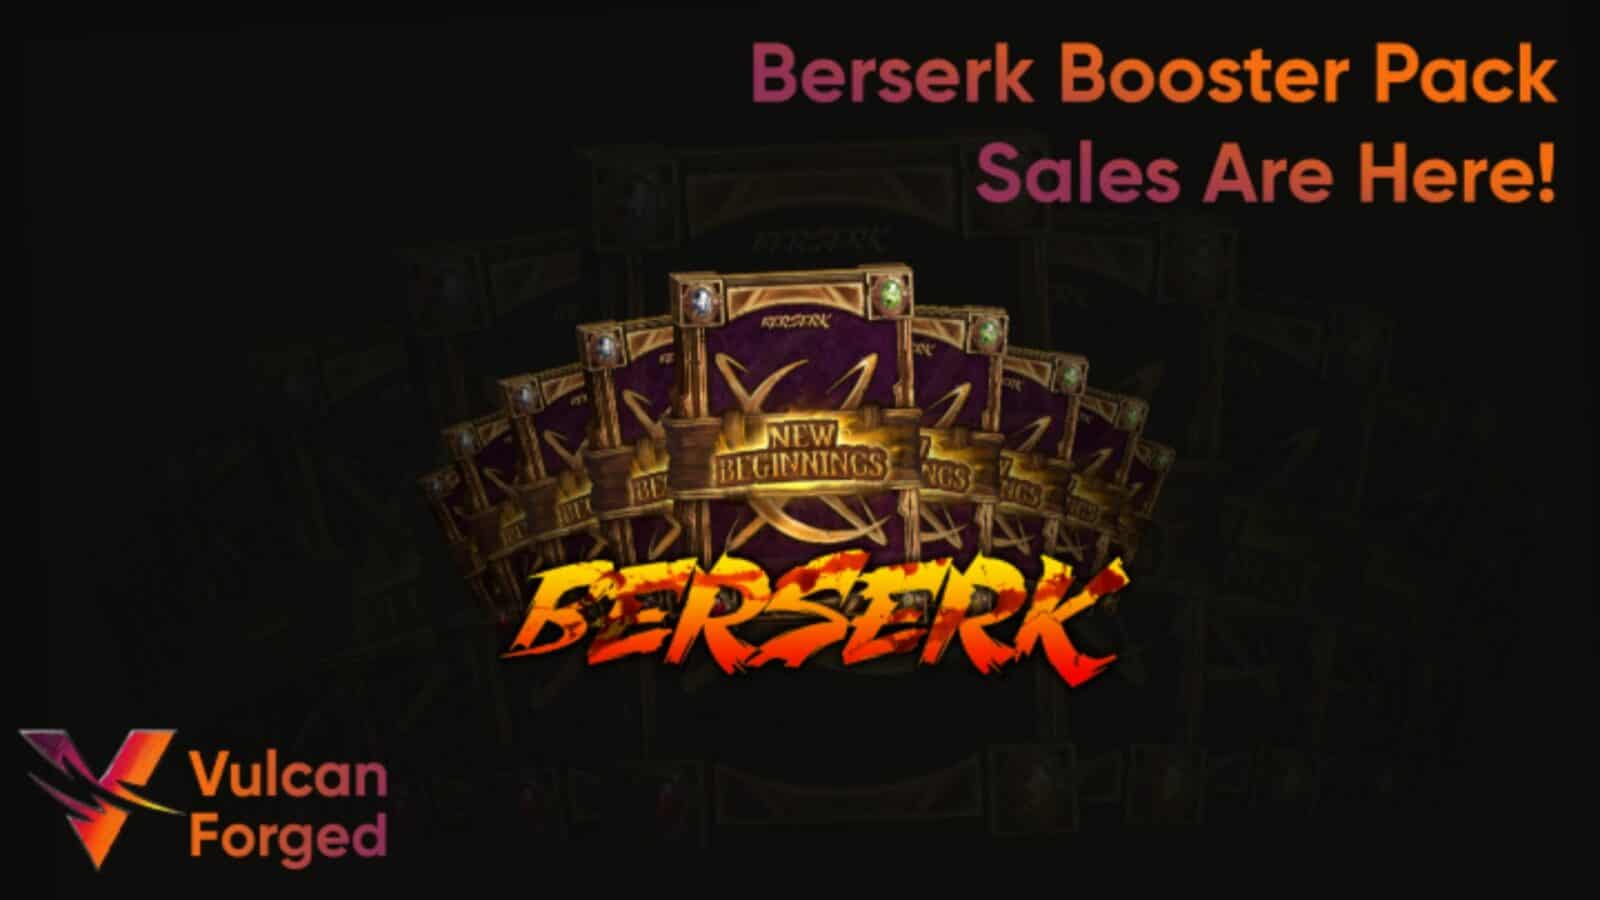 Vulcan Forged Announced The Berserk Booster Pack Sale